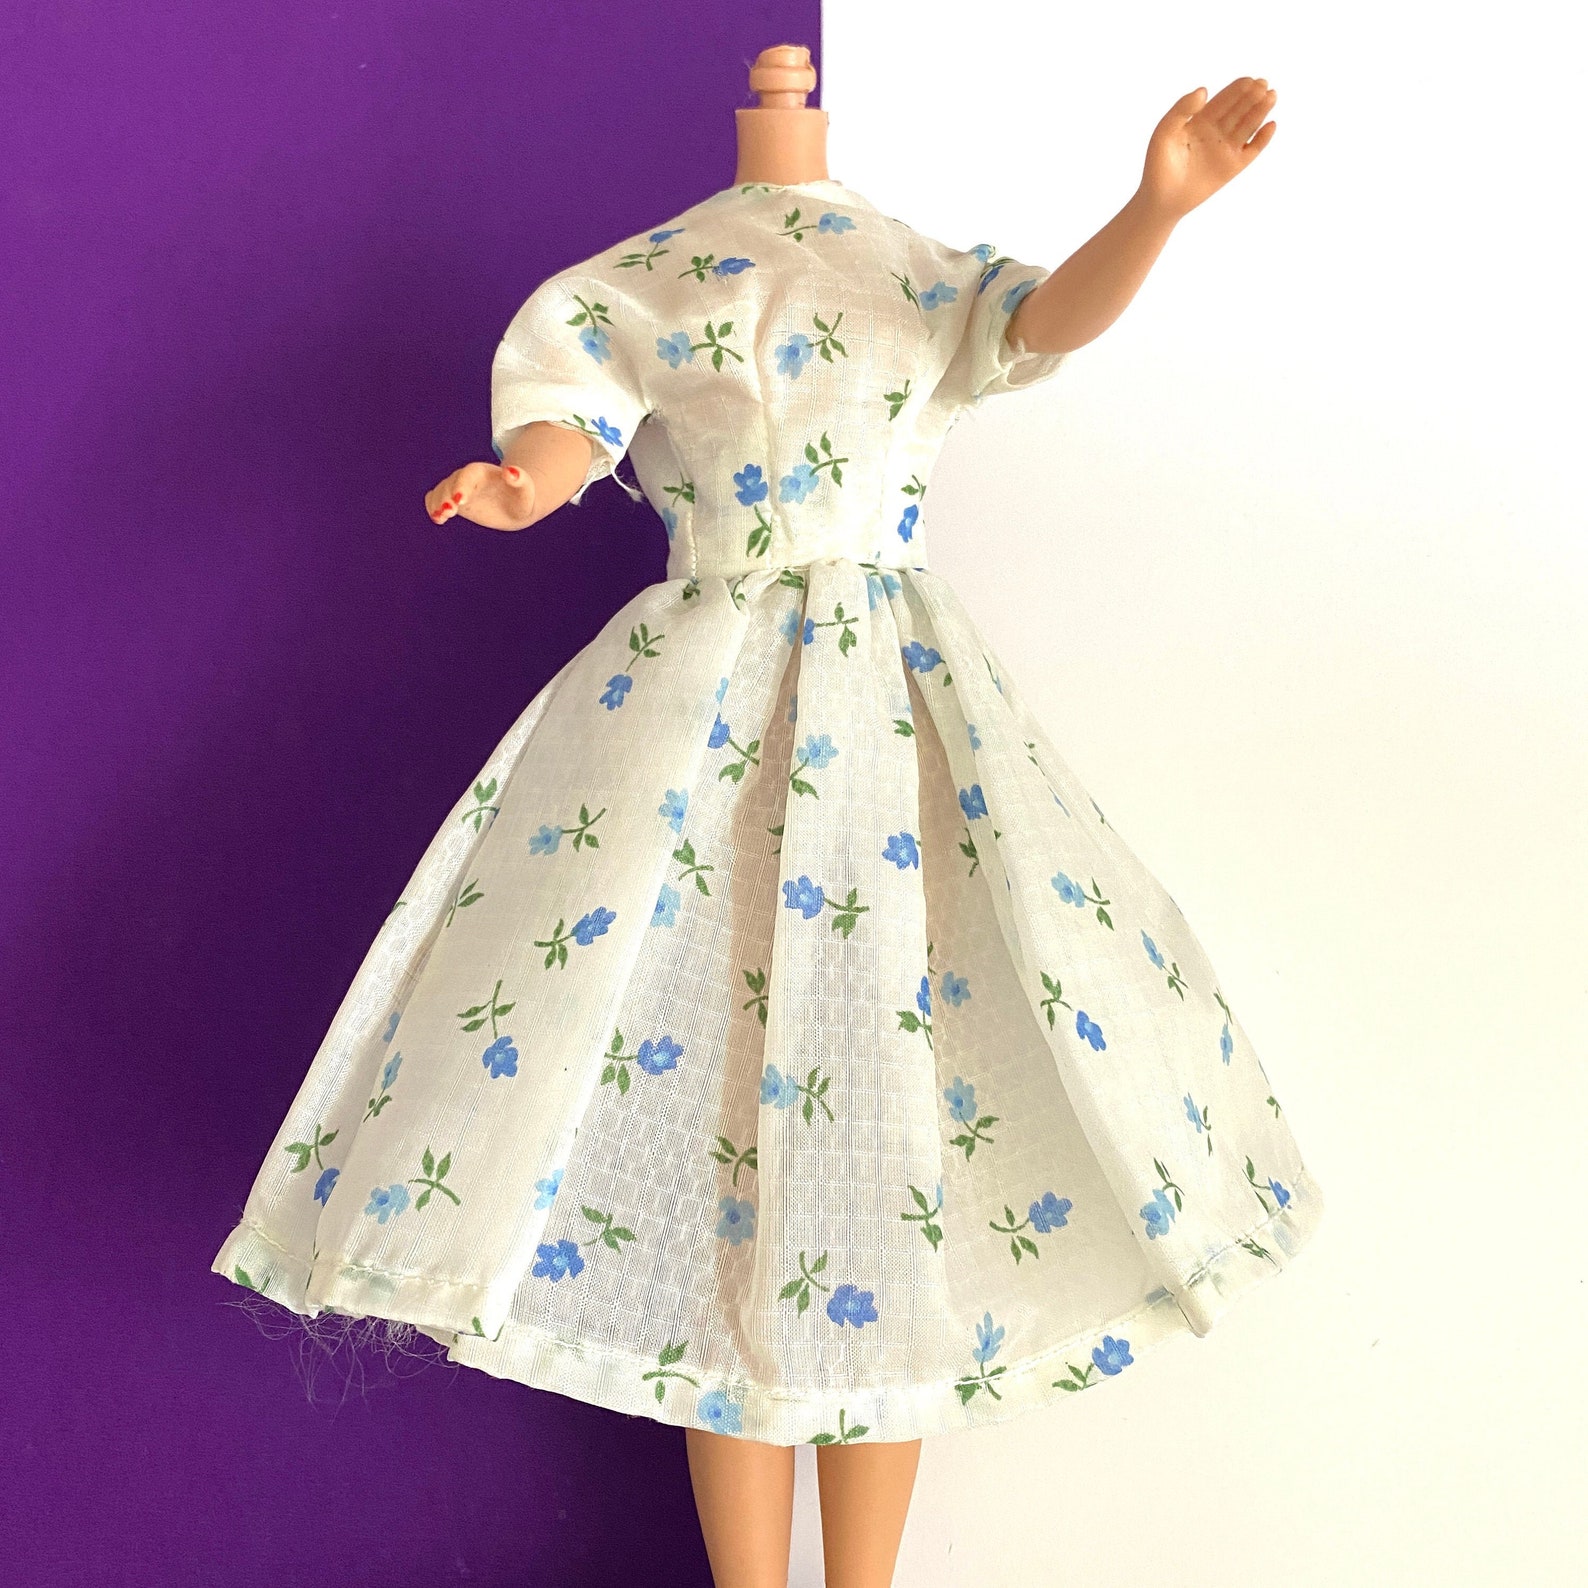 Vintage 1960s Barbie Dress Homemade White Organdy With Blue - Etsy